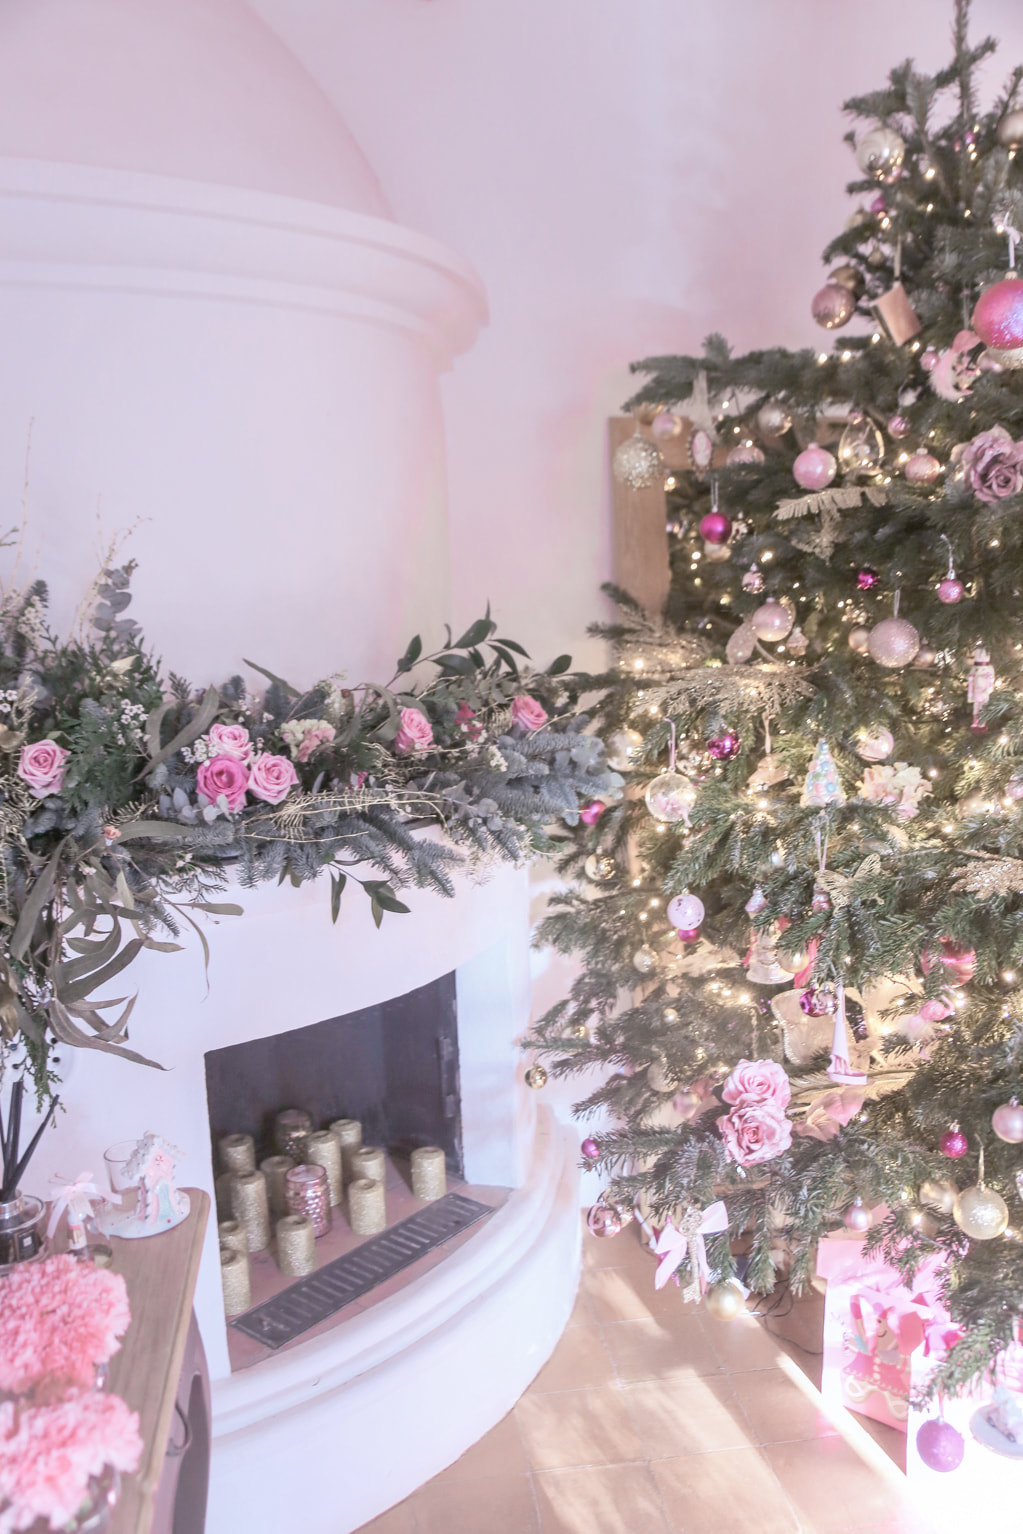 How I decorate for Christmas - Part two by The Belle Blog 